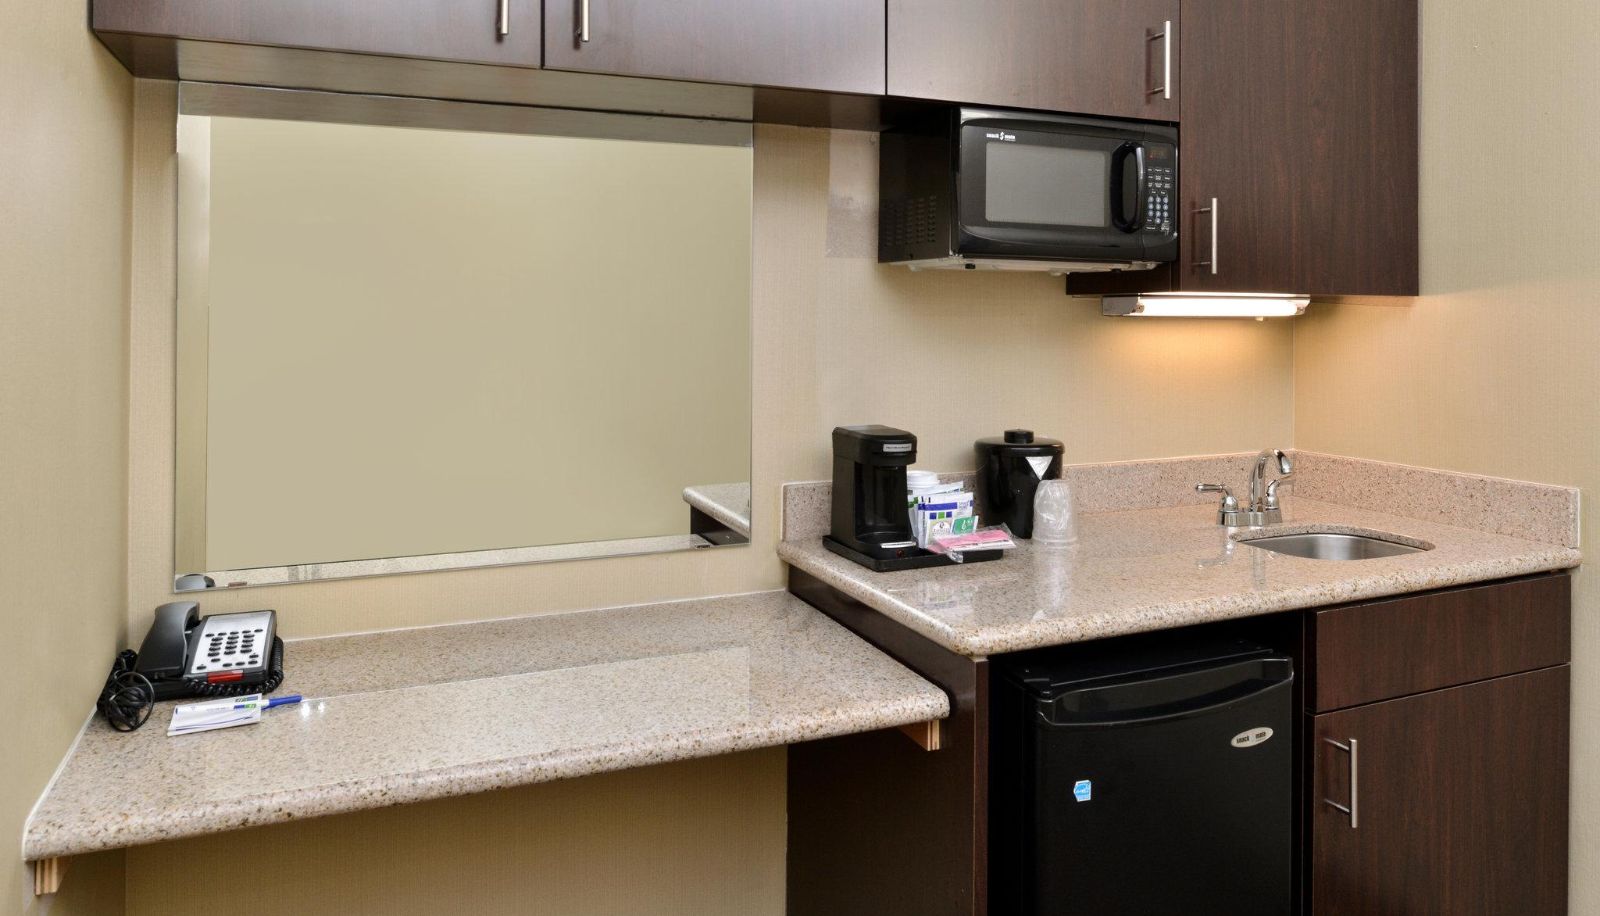 Holiday Inn Express & Suites INDIANAPOLIS W - AIRPORT AREA (Indianapolis City)